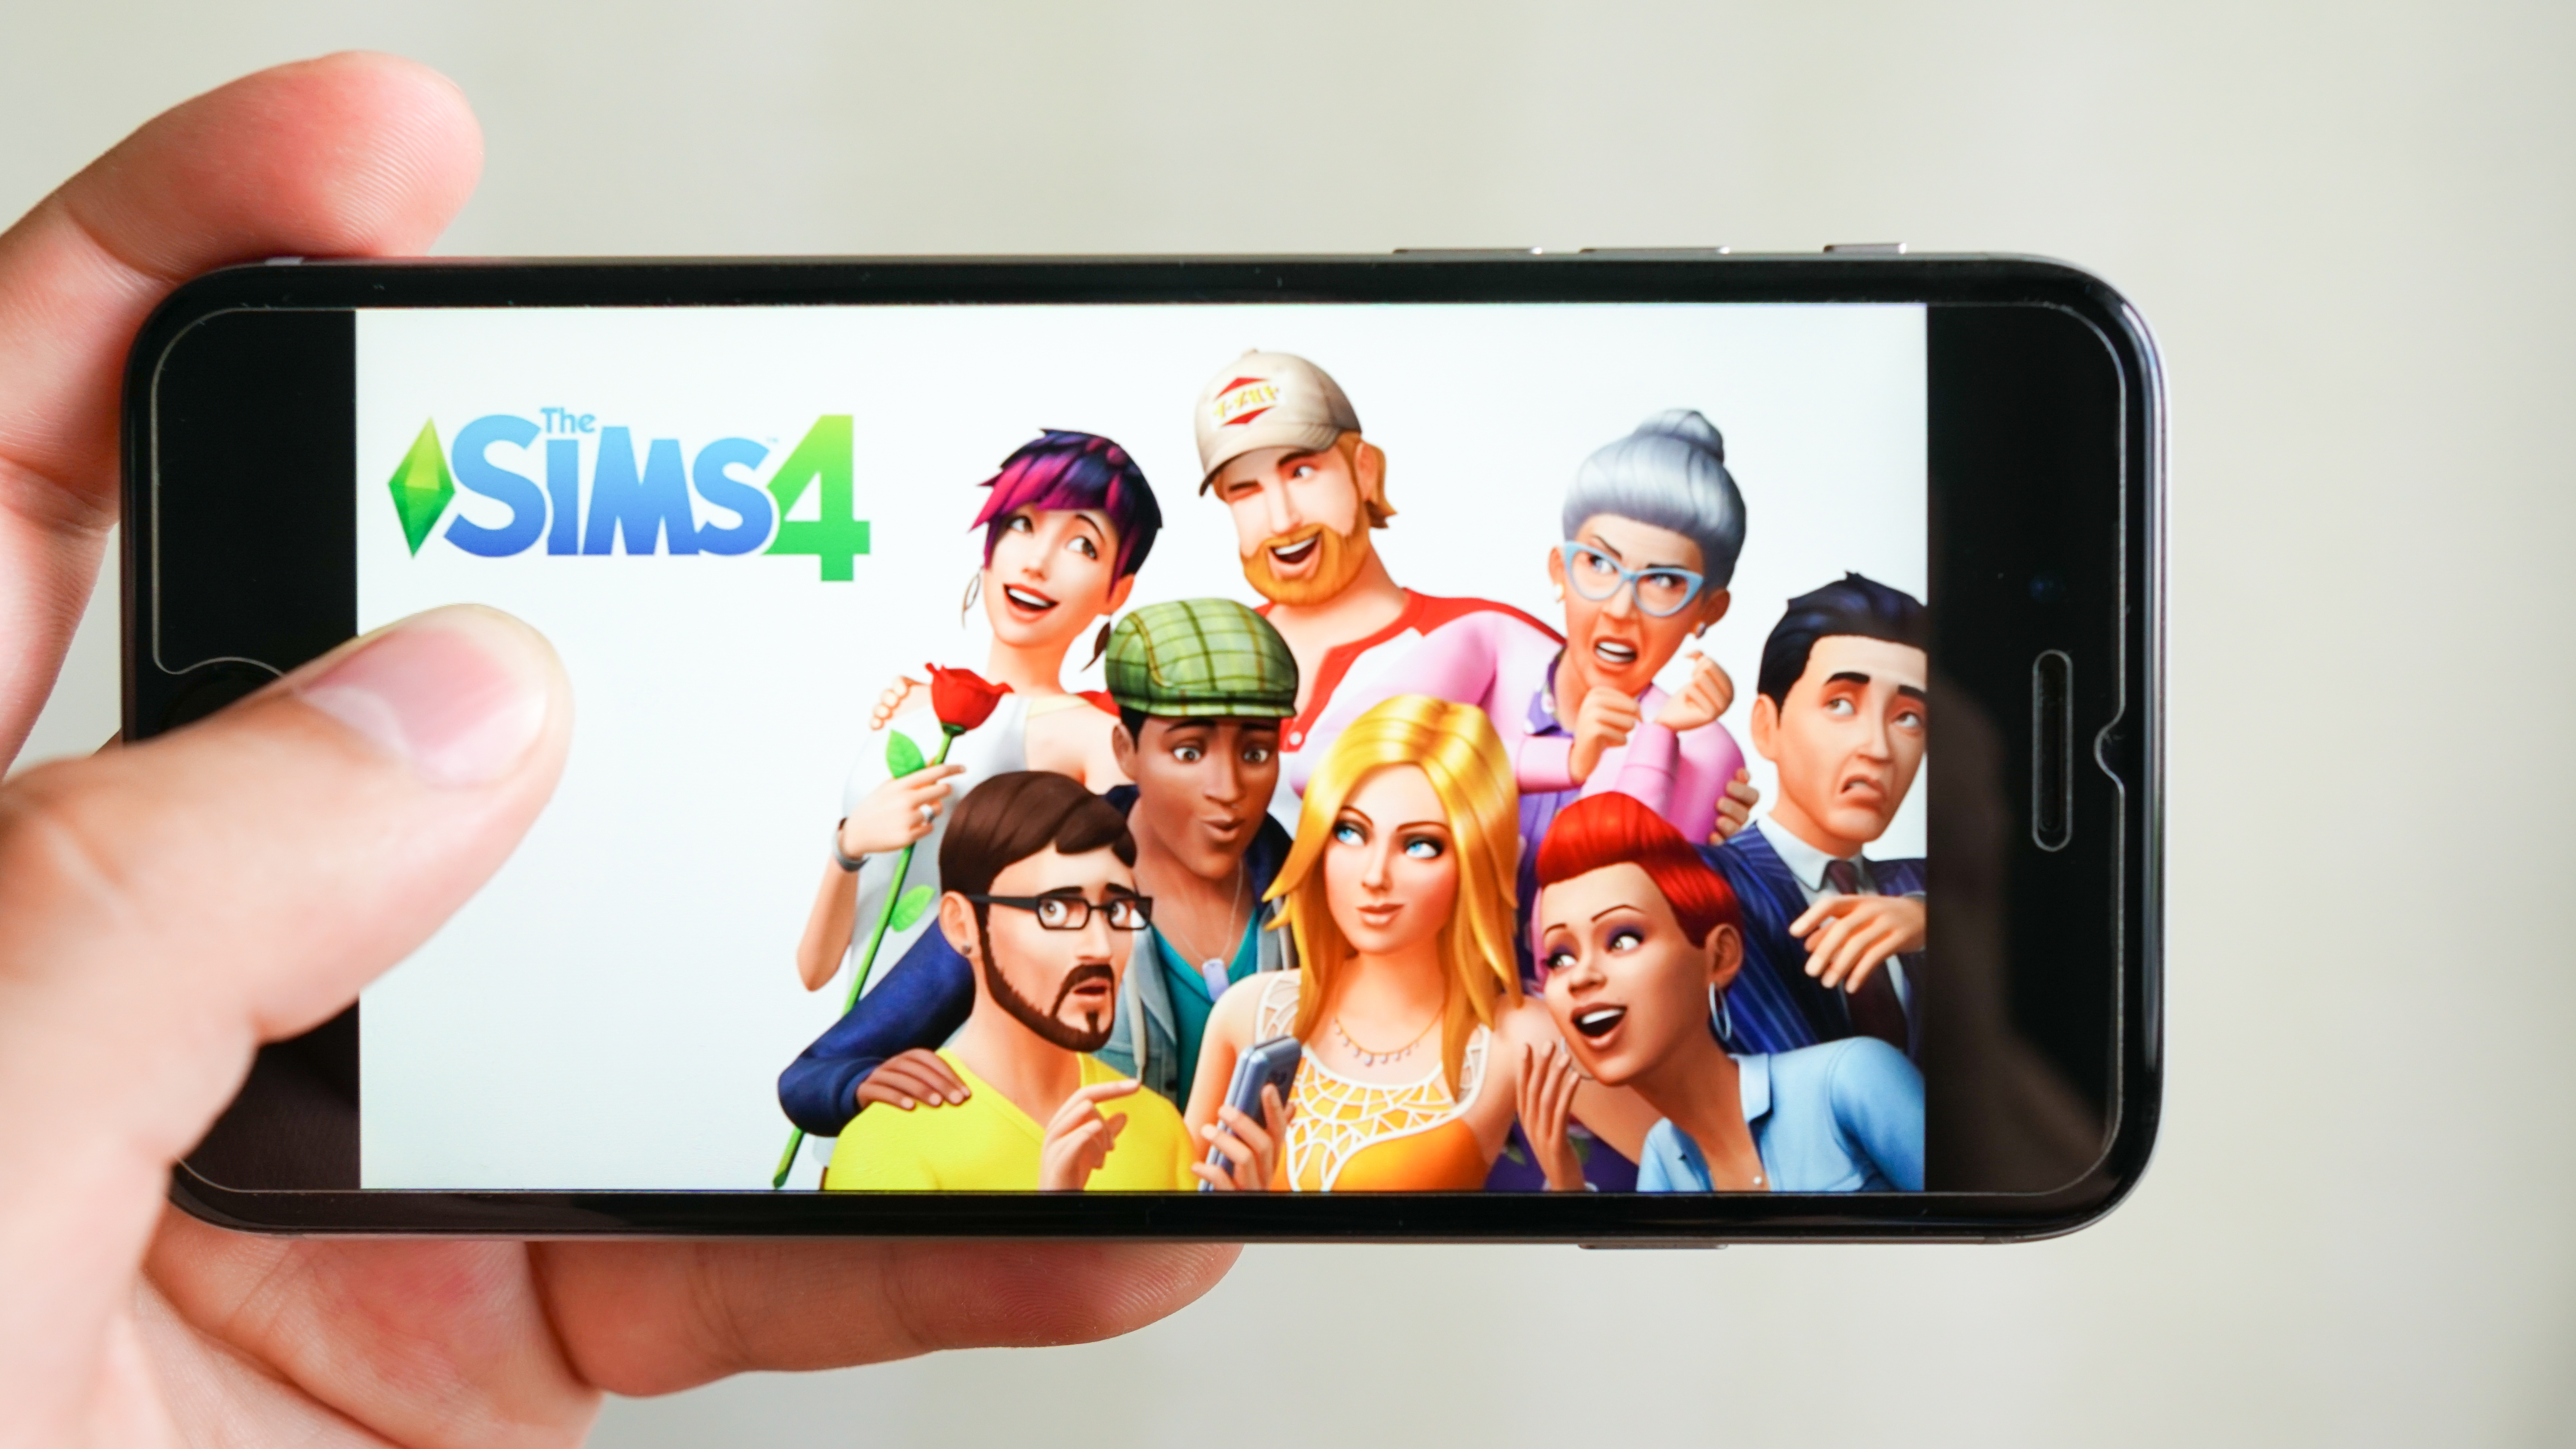 "The Sims 4" poster displaying on a touch screen smartphone | Source: Shutterstock